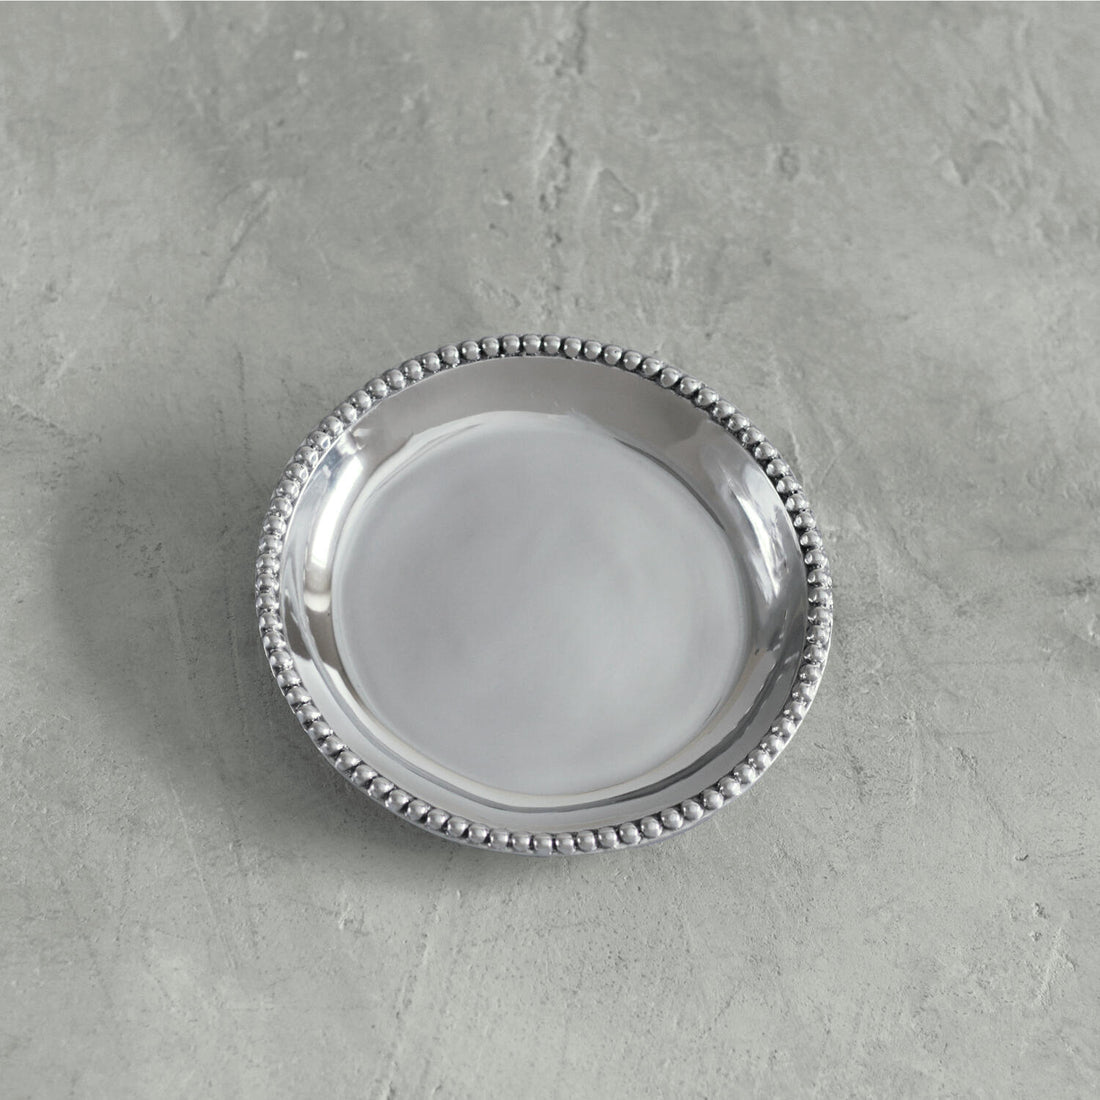 GIFTABLES Pearl Round Plain Tray